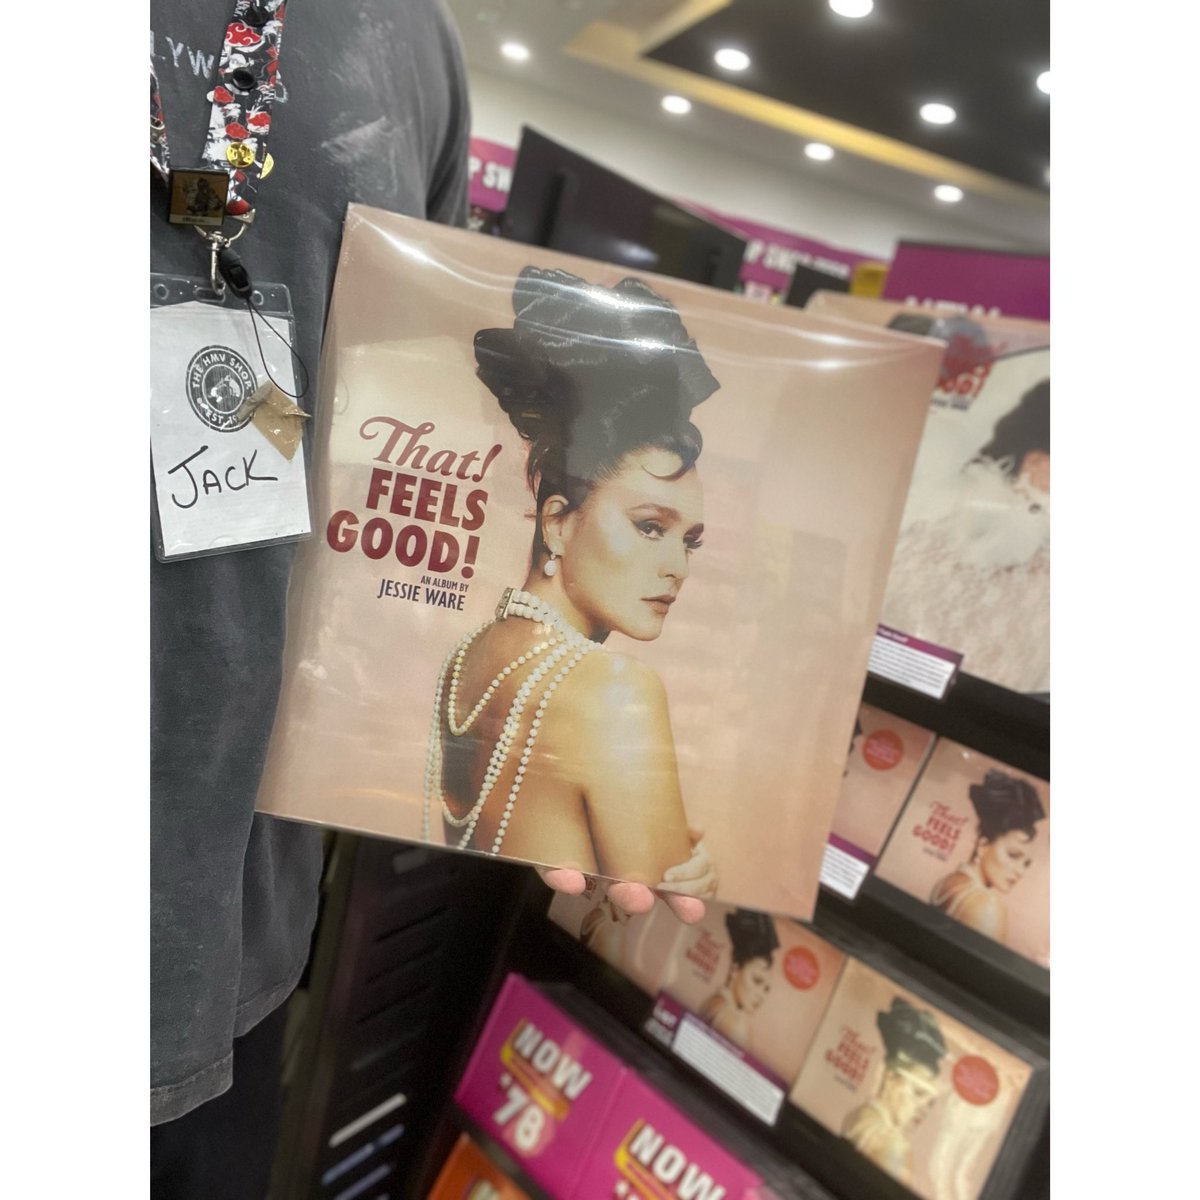 @JessieWare That! Feels Good! ✨

Our HMV List album of the month, Jessie is back with the follow up album to 2020’s ‘What’s your pleasure?’.

We can’t wait to belt this out today! 🎵 

#hmv #hmvrecordshop #jessieware #thatfeelsgood #music #lp